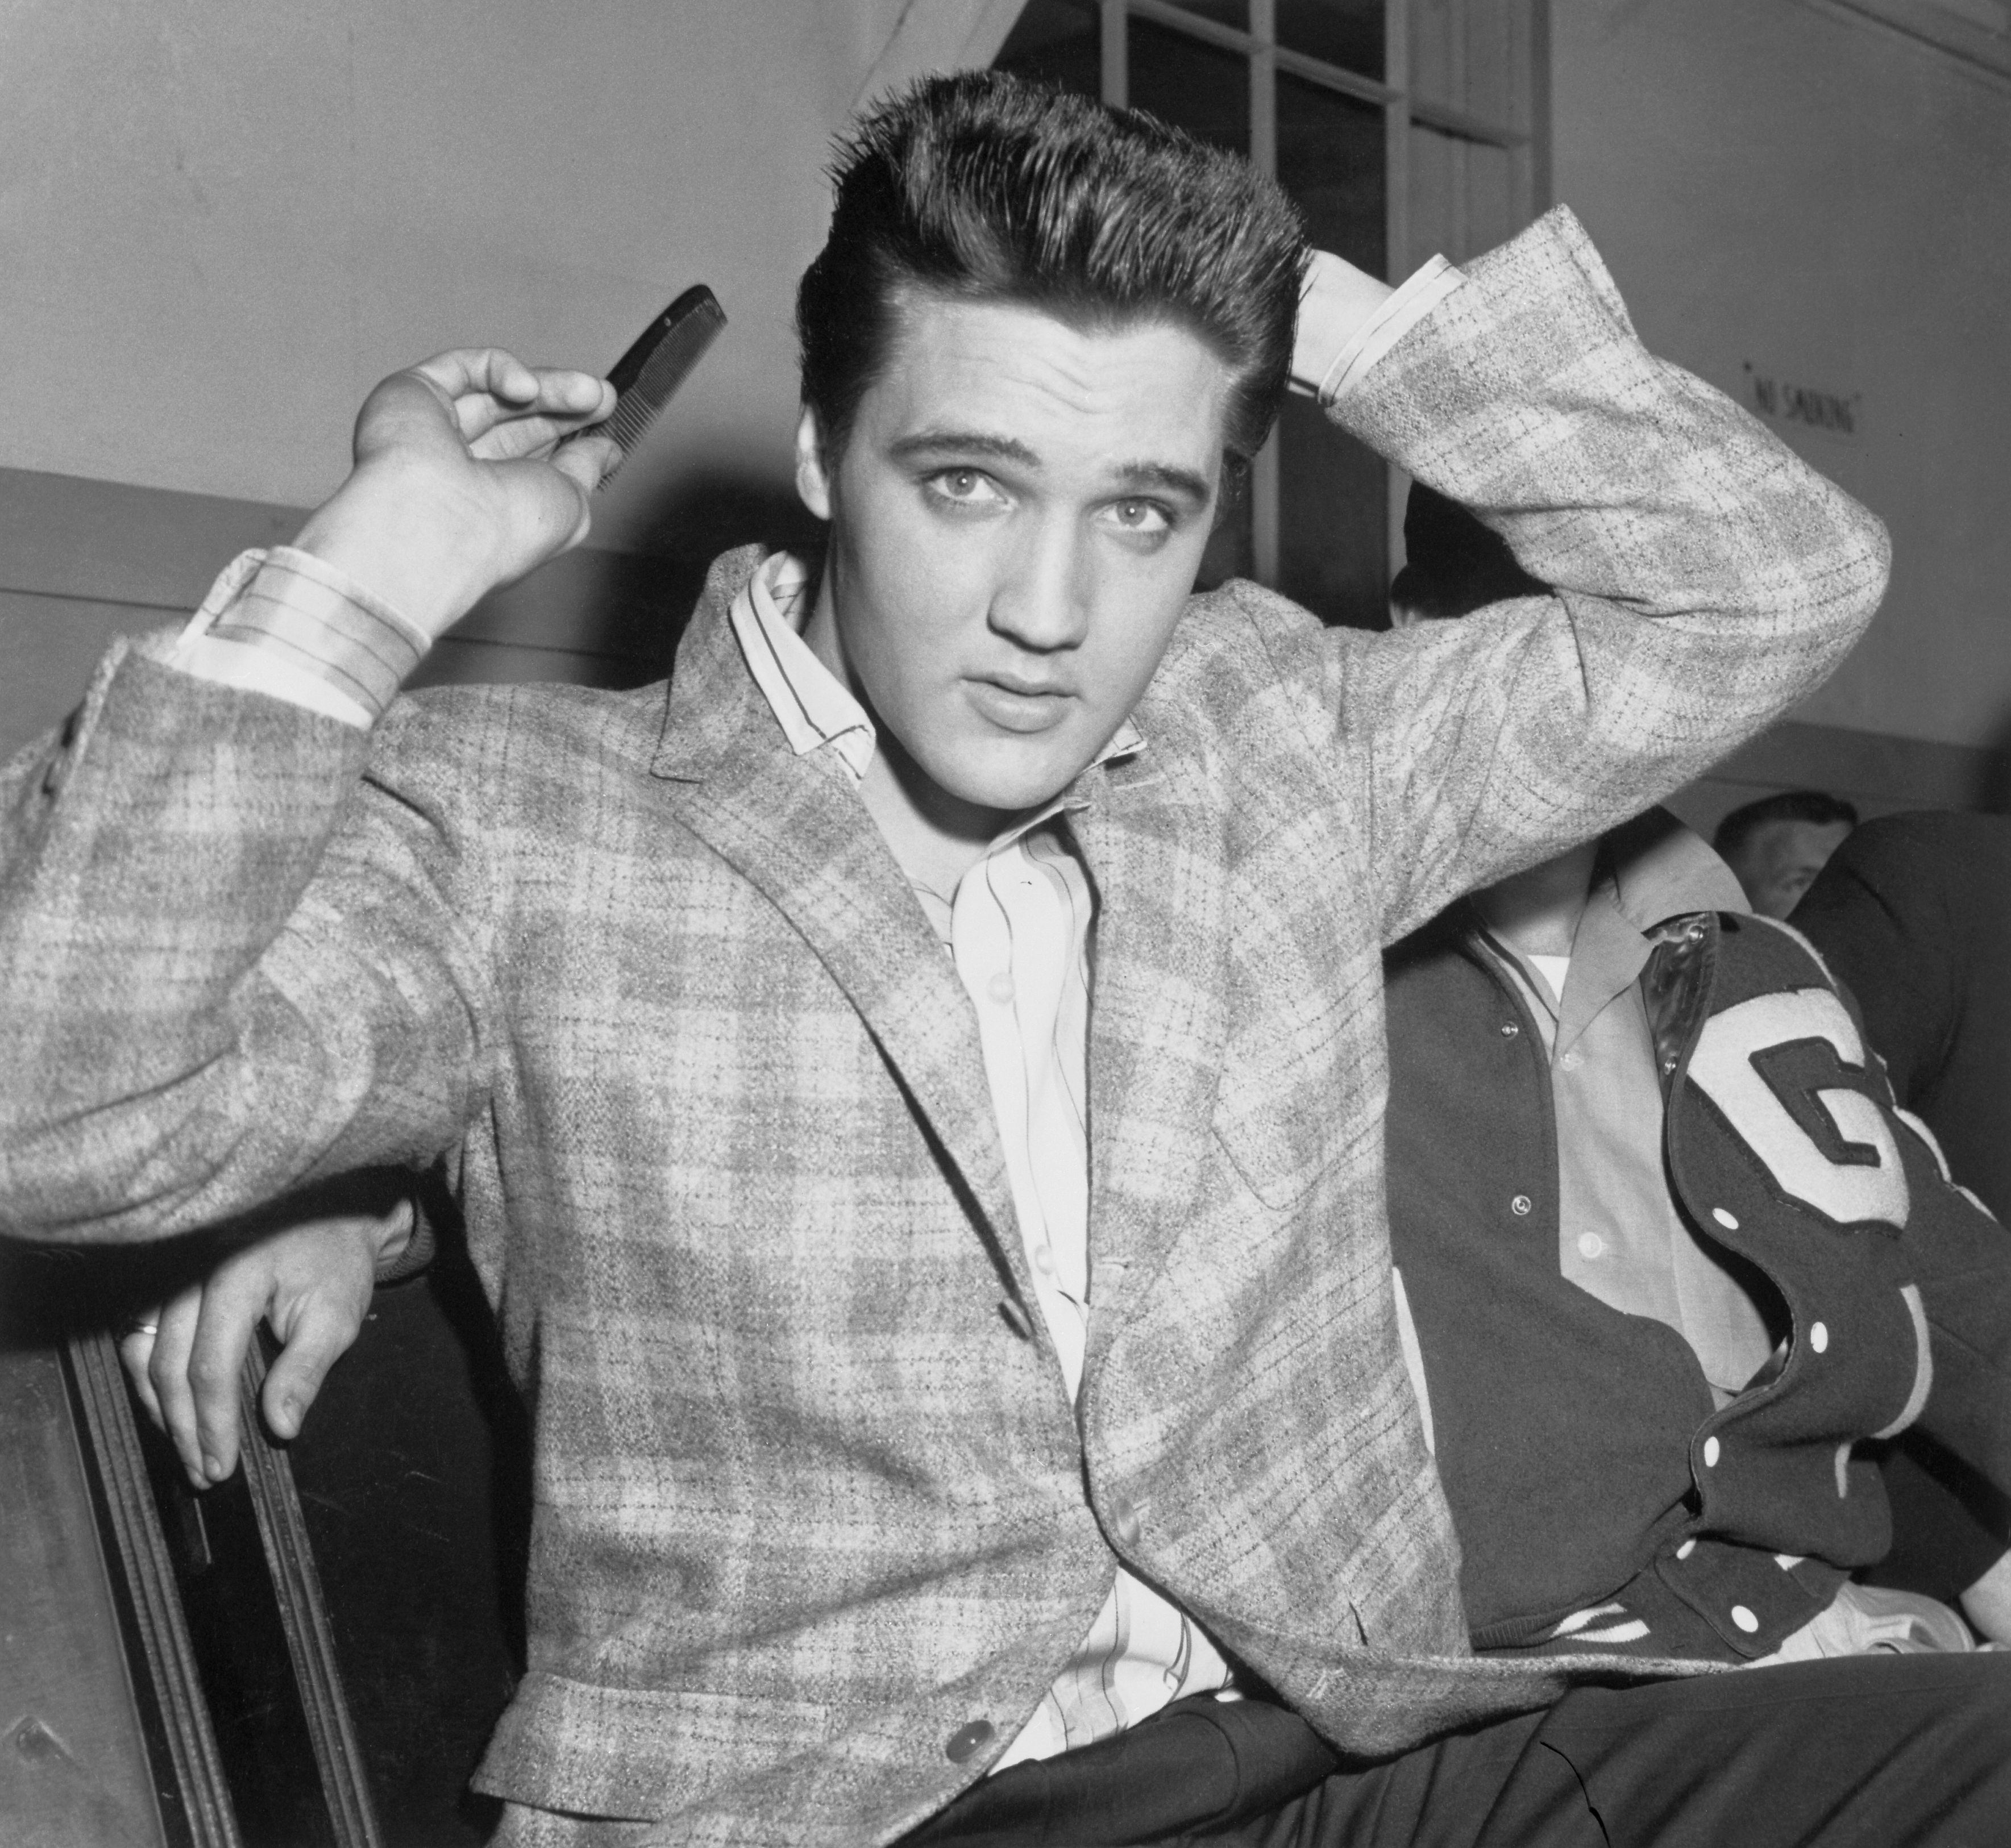 Elvis Presley's Pivotal Year of 1969 Celebrated with Massive, 11